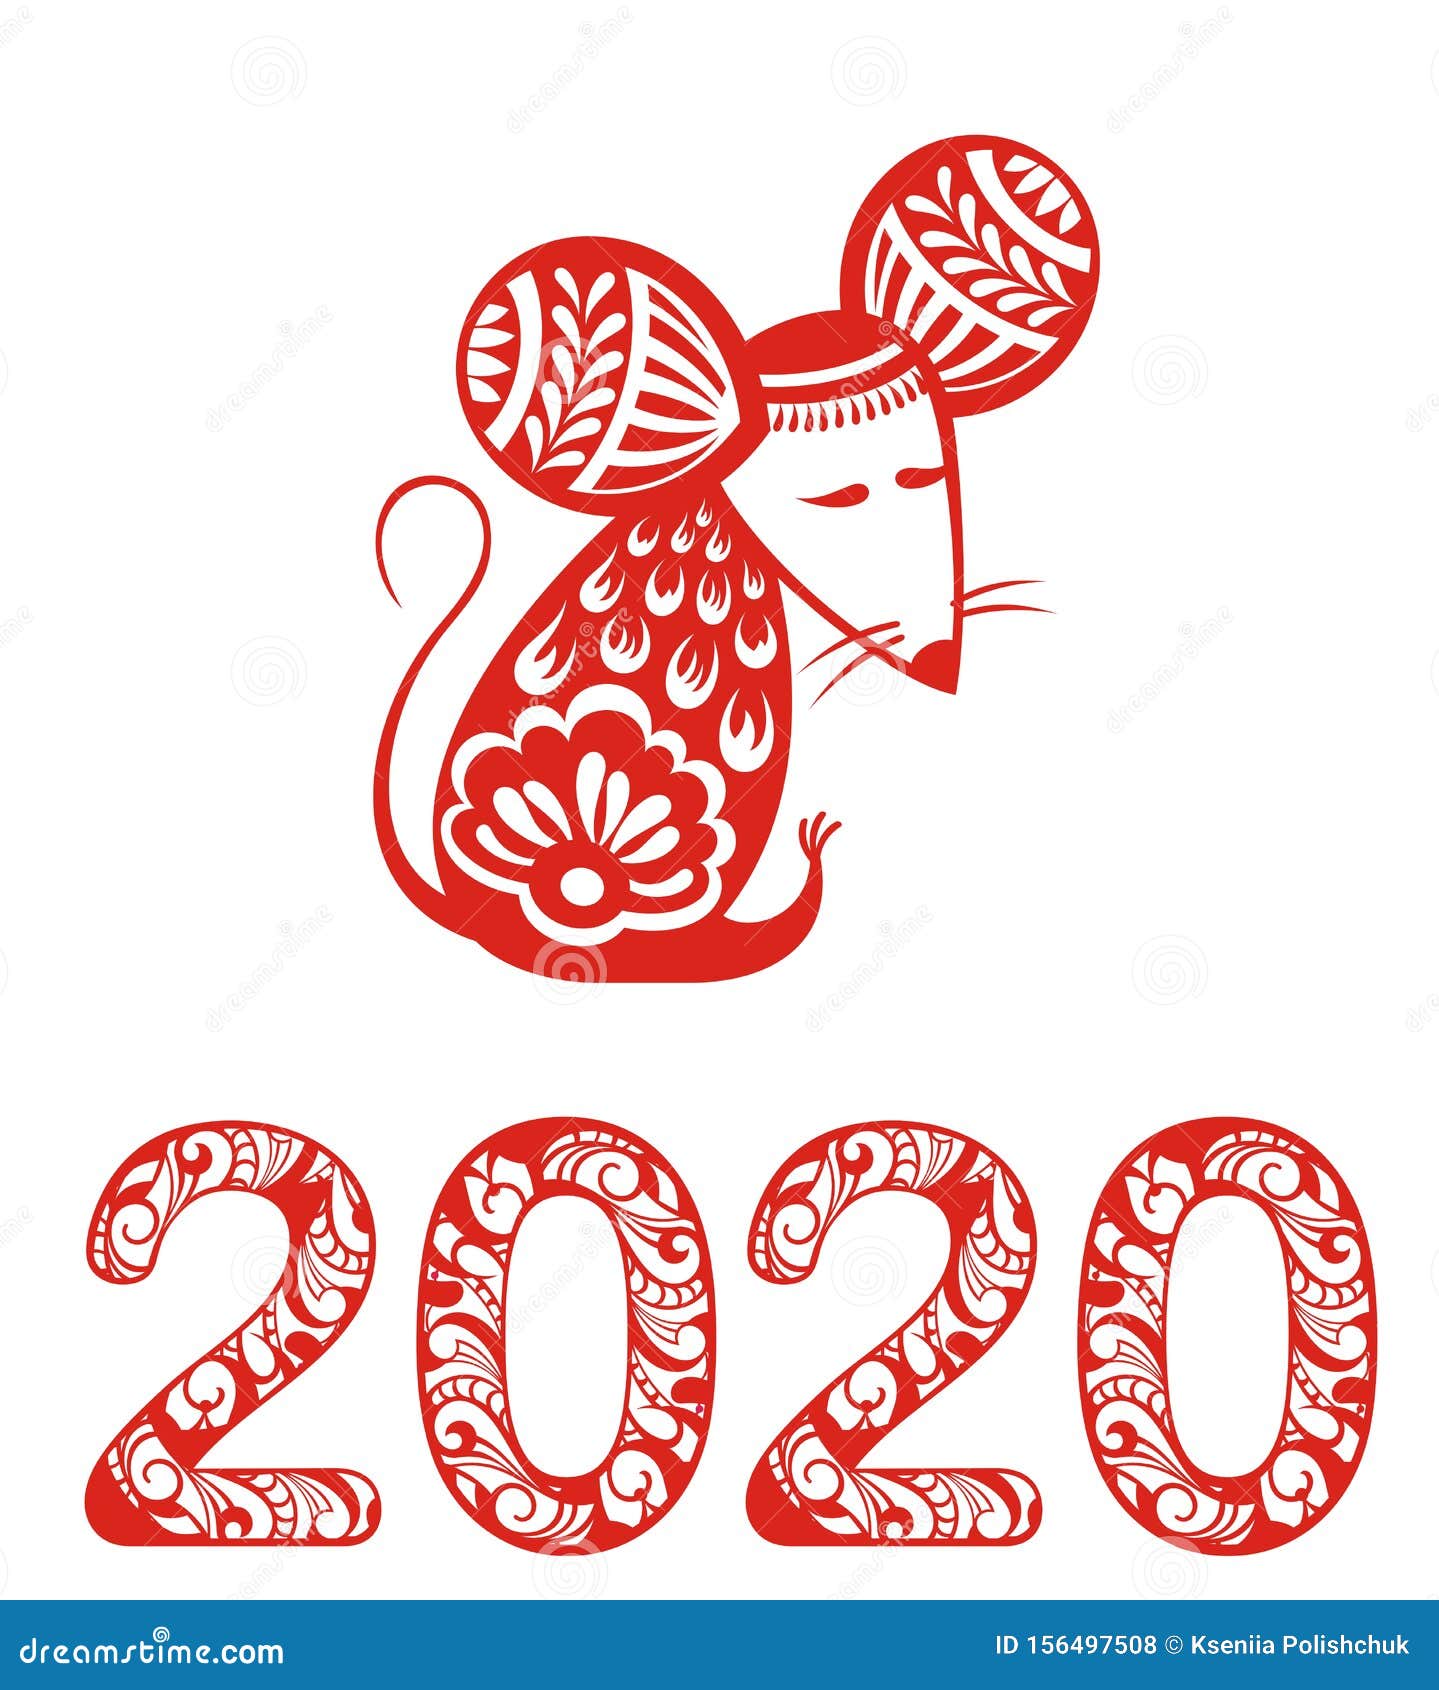 Chinese New Year ~ The Year of the Rat 2020 ~ Greetings Cards~